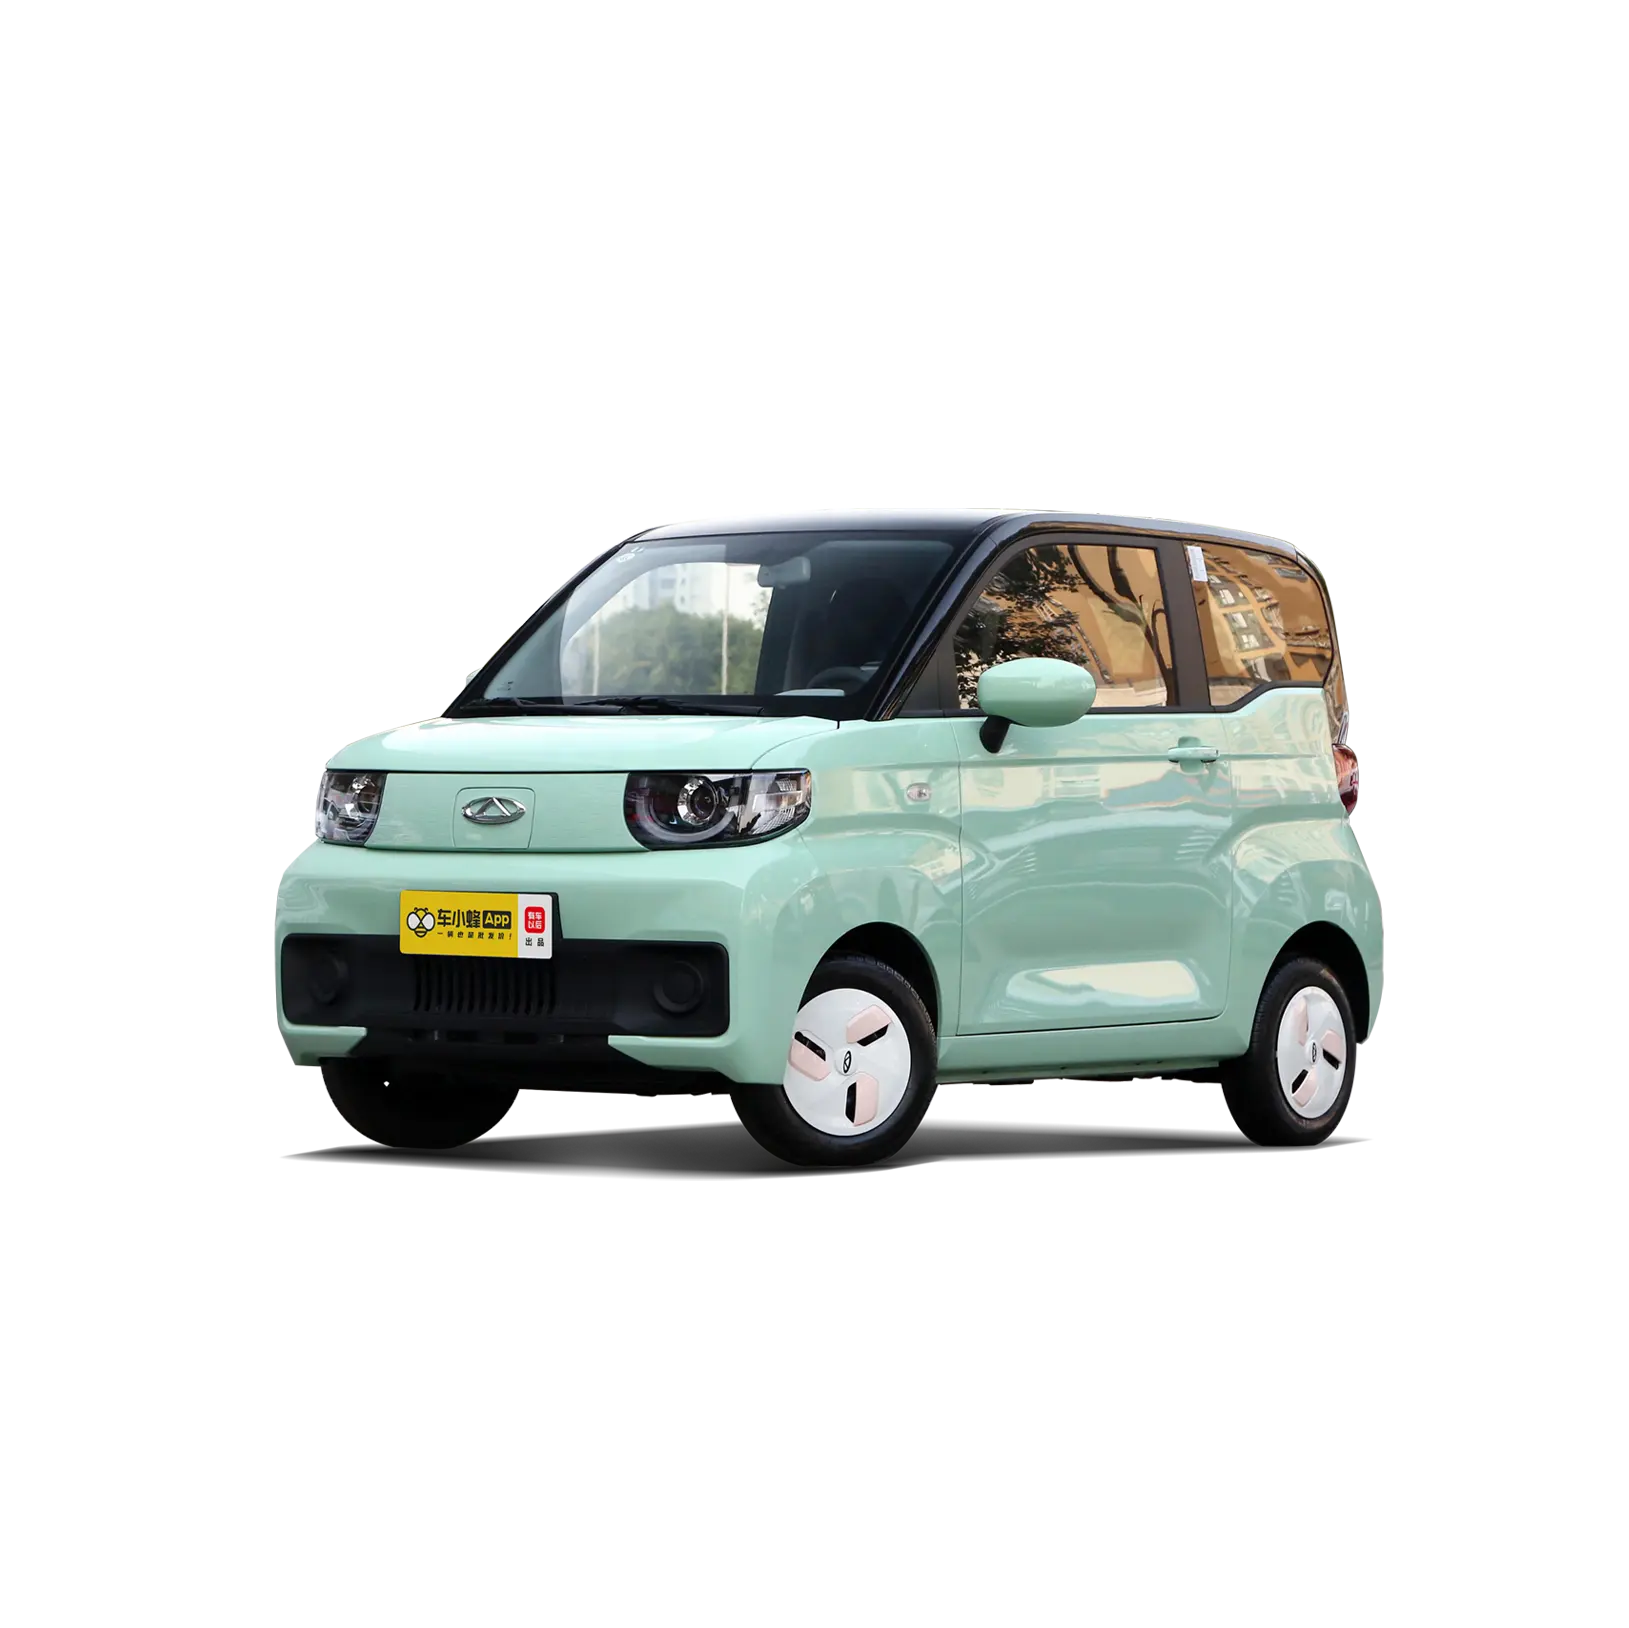 Chery QQ ice cream mini electric Car 3-door 4-seater 20kw passenger vehicles Cheap mini electric cars for adult